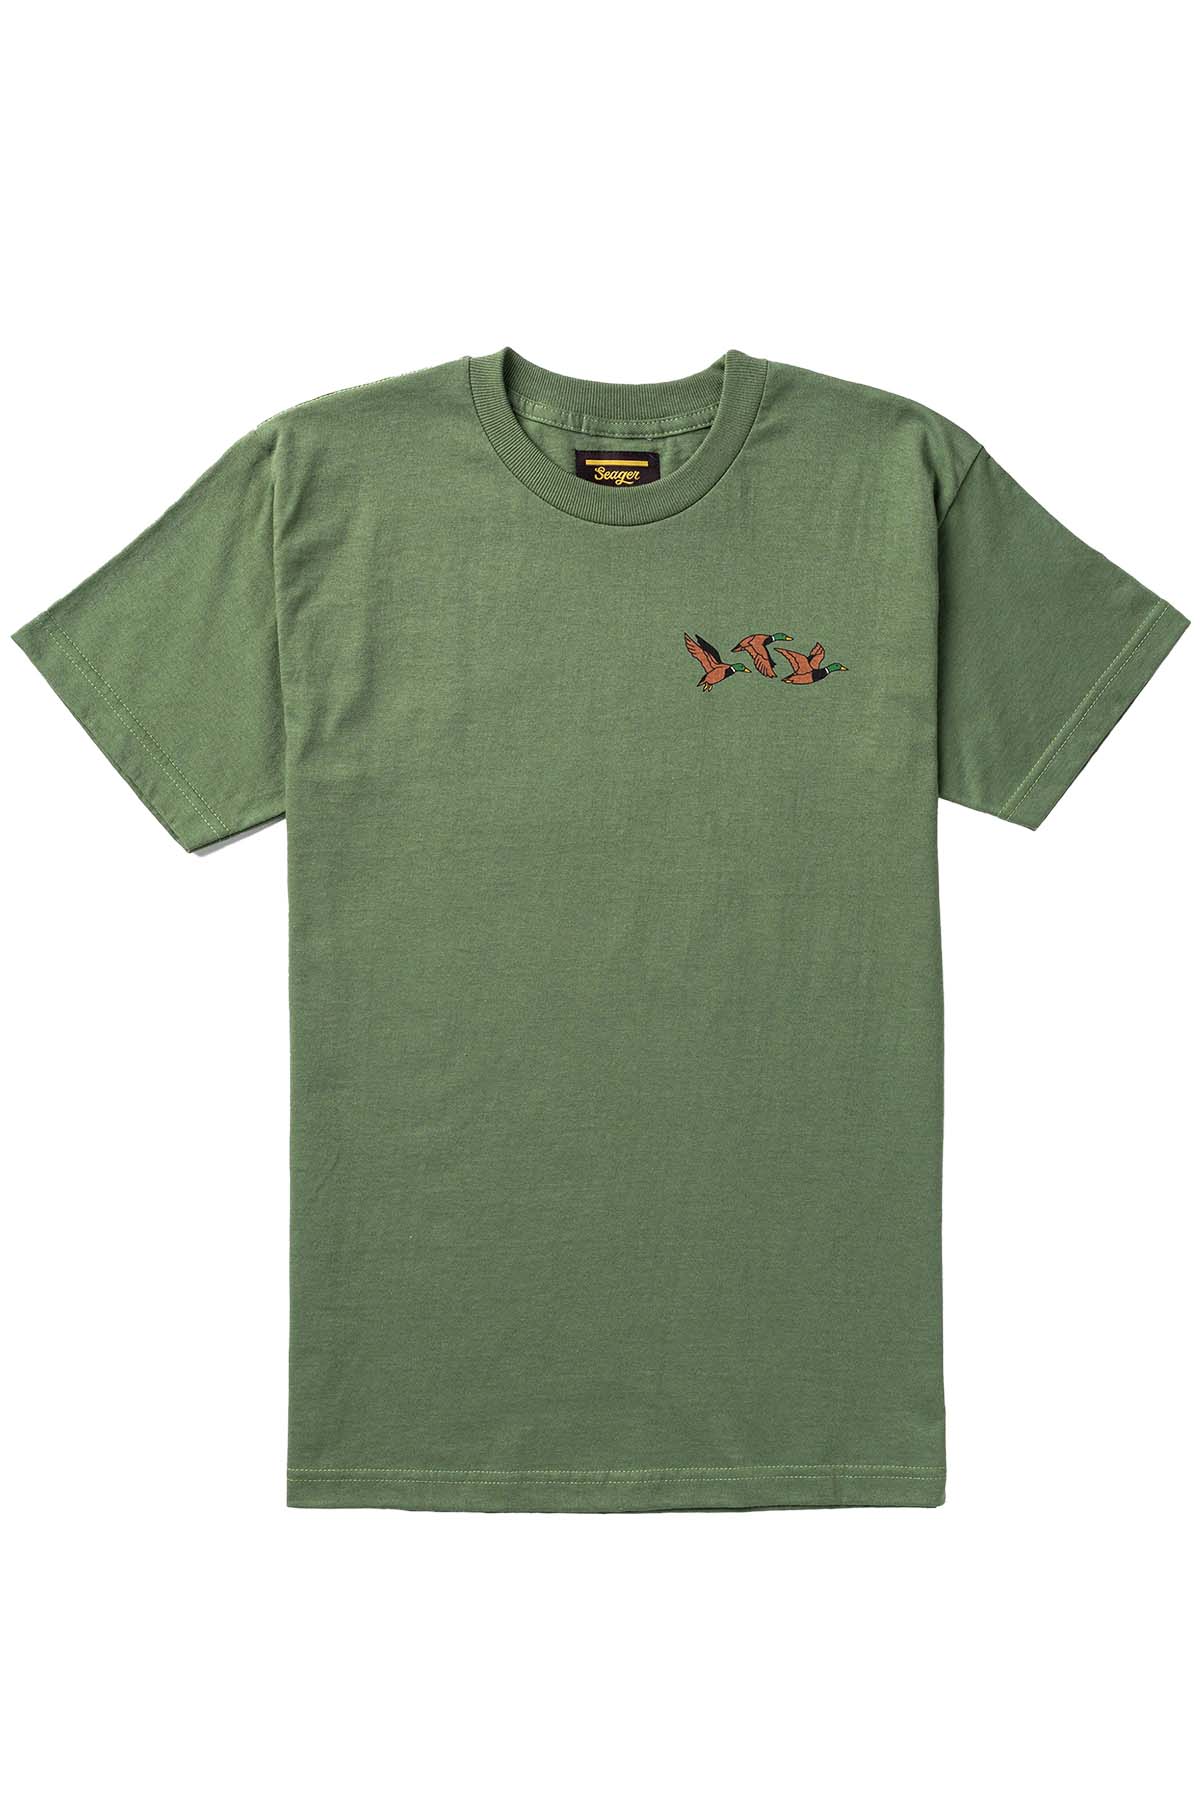 Seager - The Good Company Tee - Army Green - Front